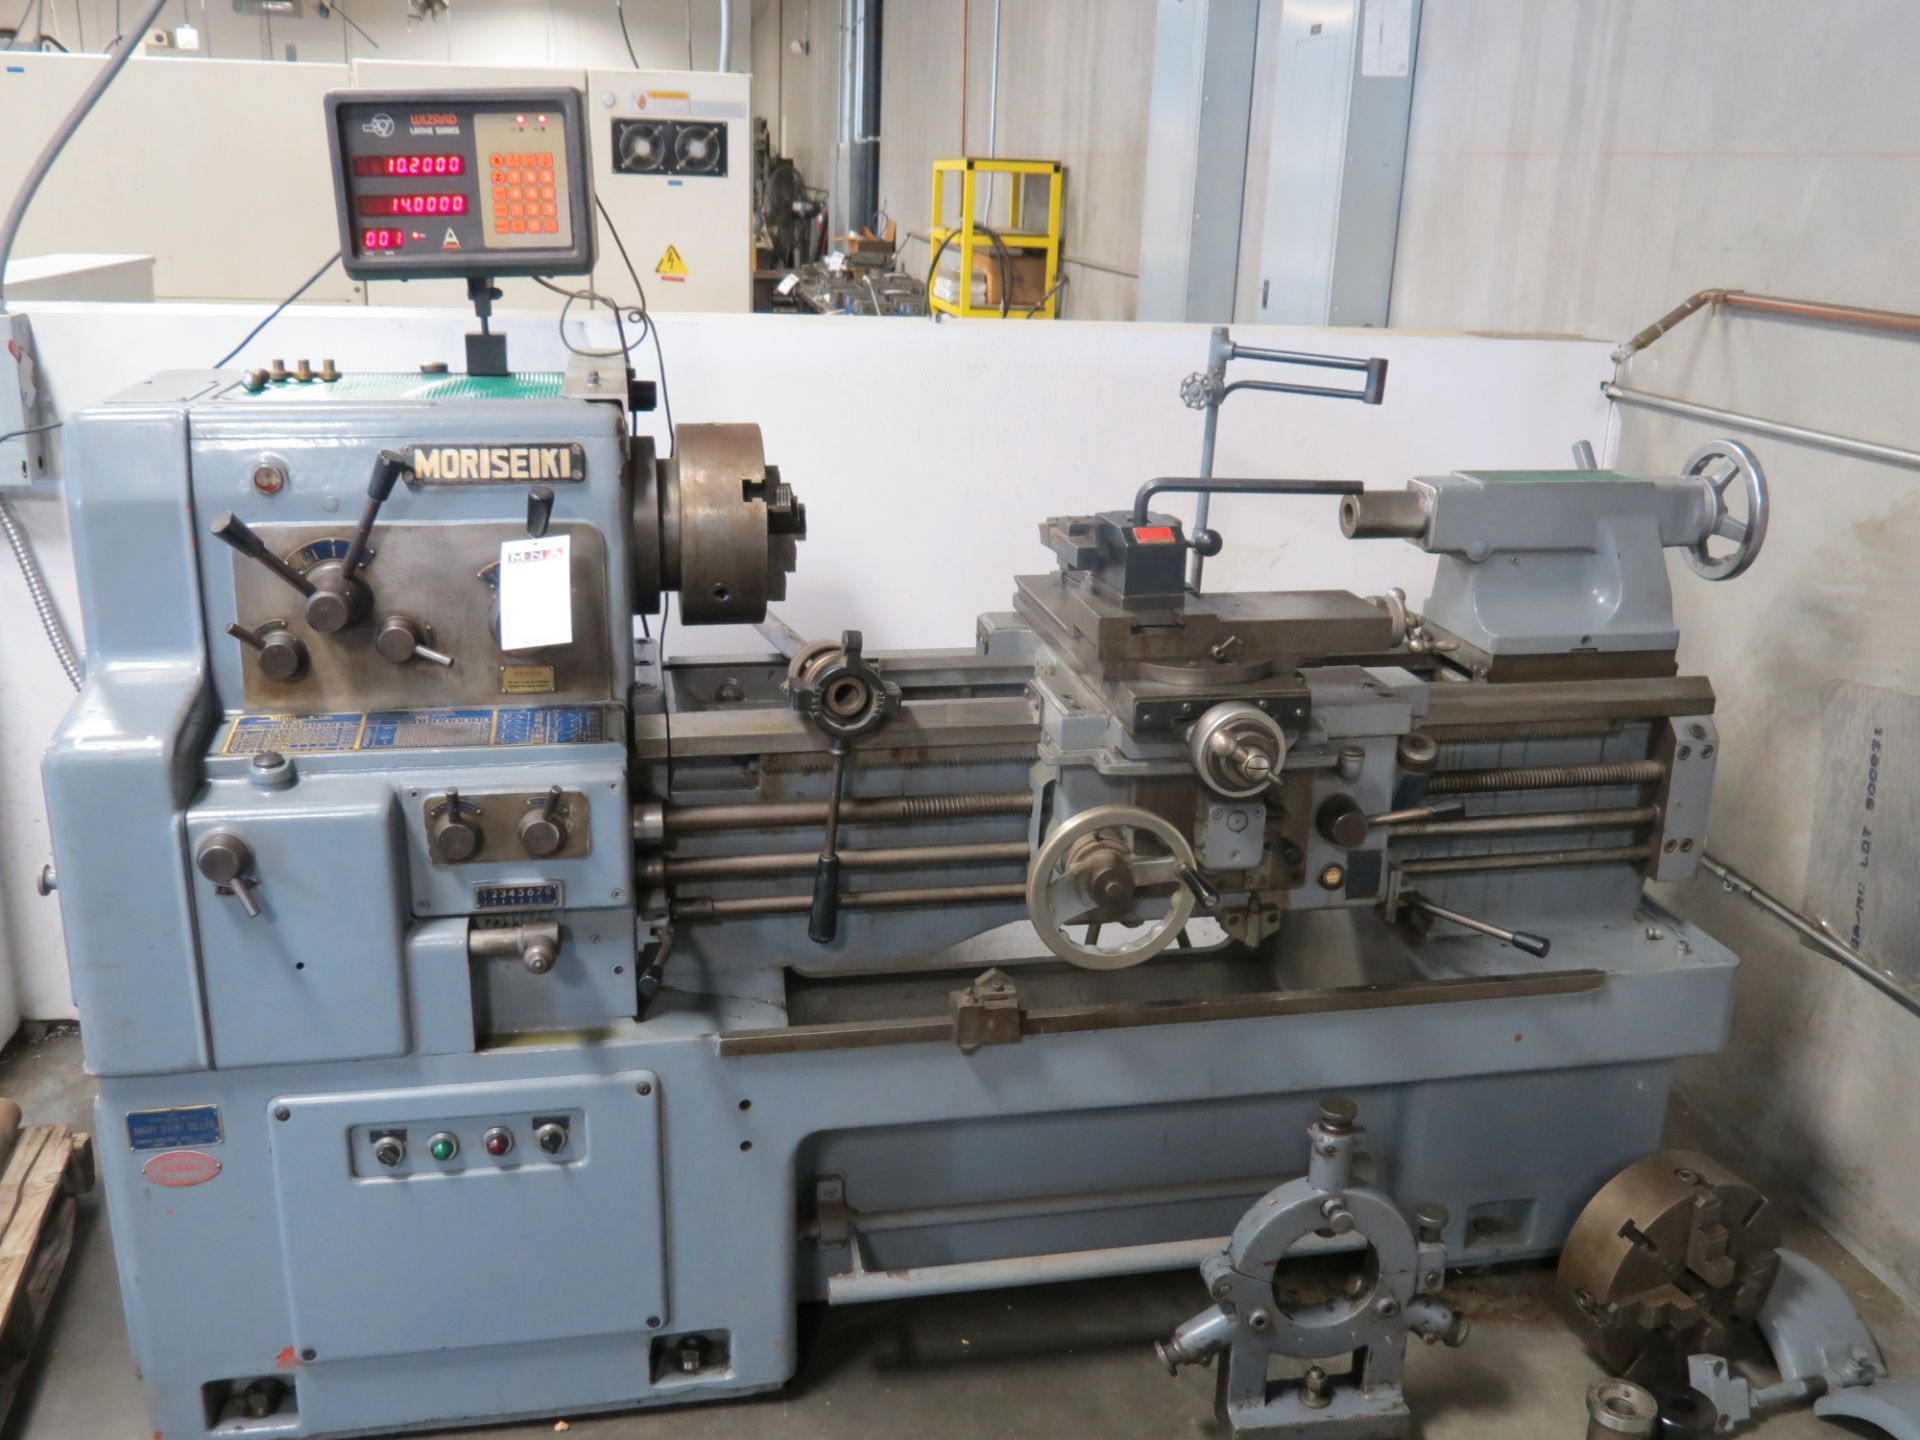 17" x 36" Mori Seiki MS-850G Gap Bed Engine Lathe, DRO, 3- and 4-jaw chucks, steady rest and tool